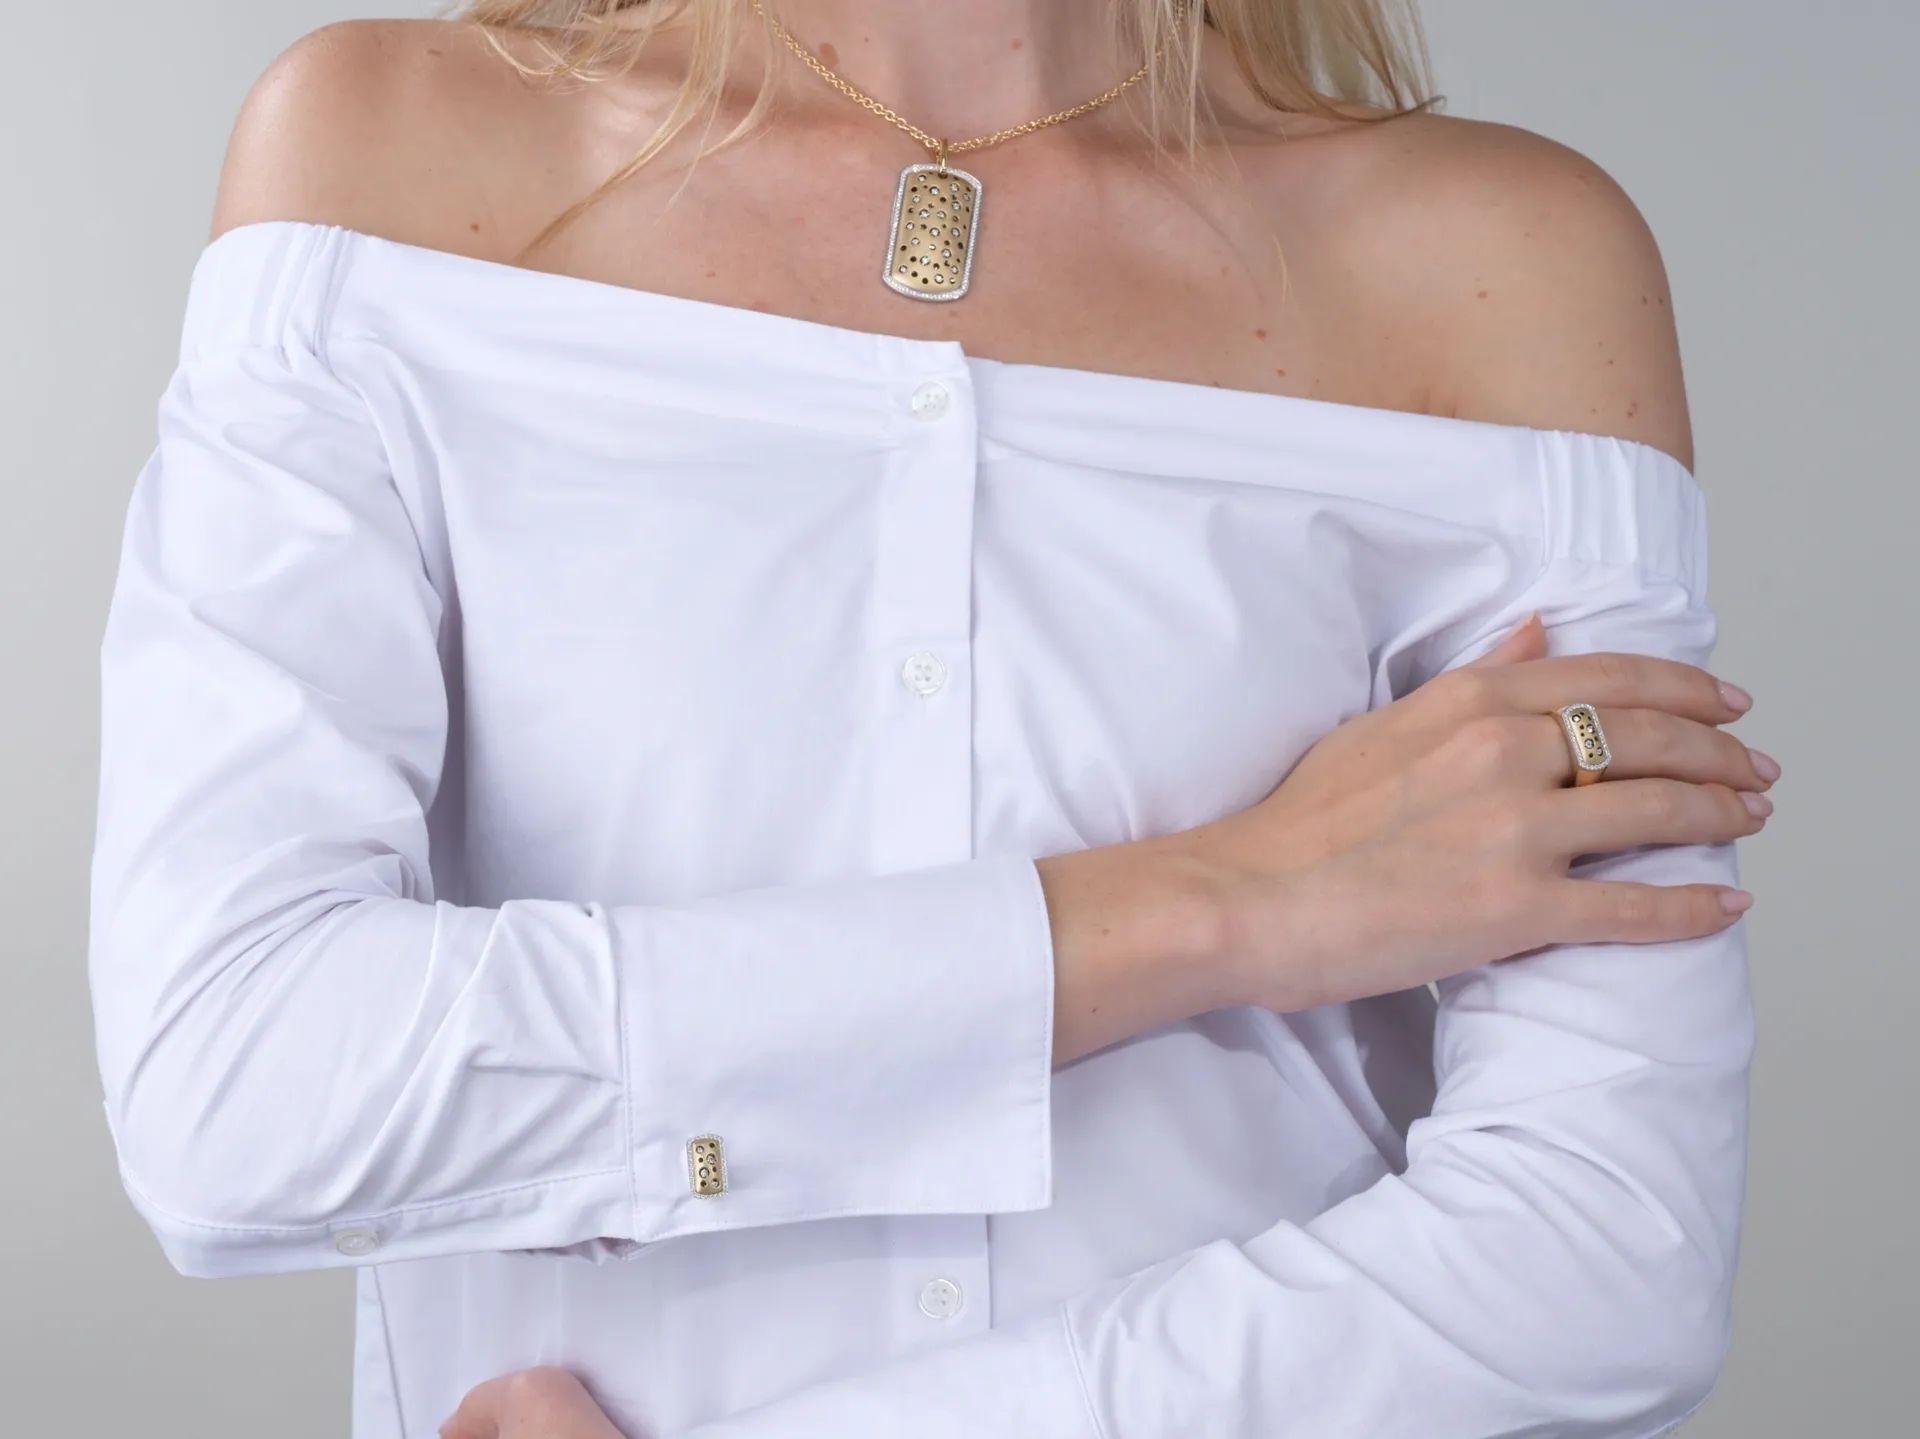 A woman wearing white shirt and gold jewelry.